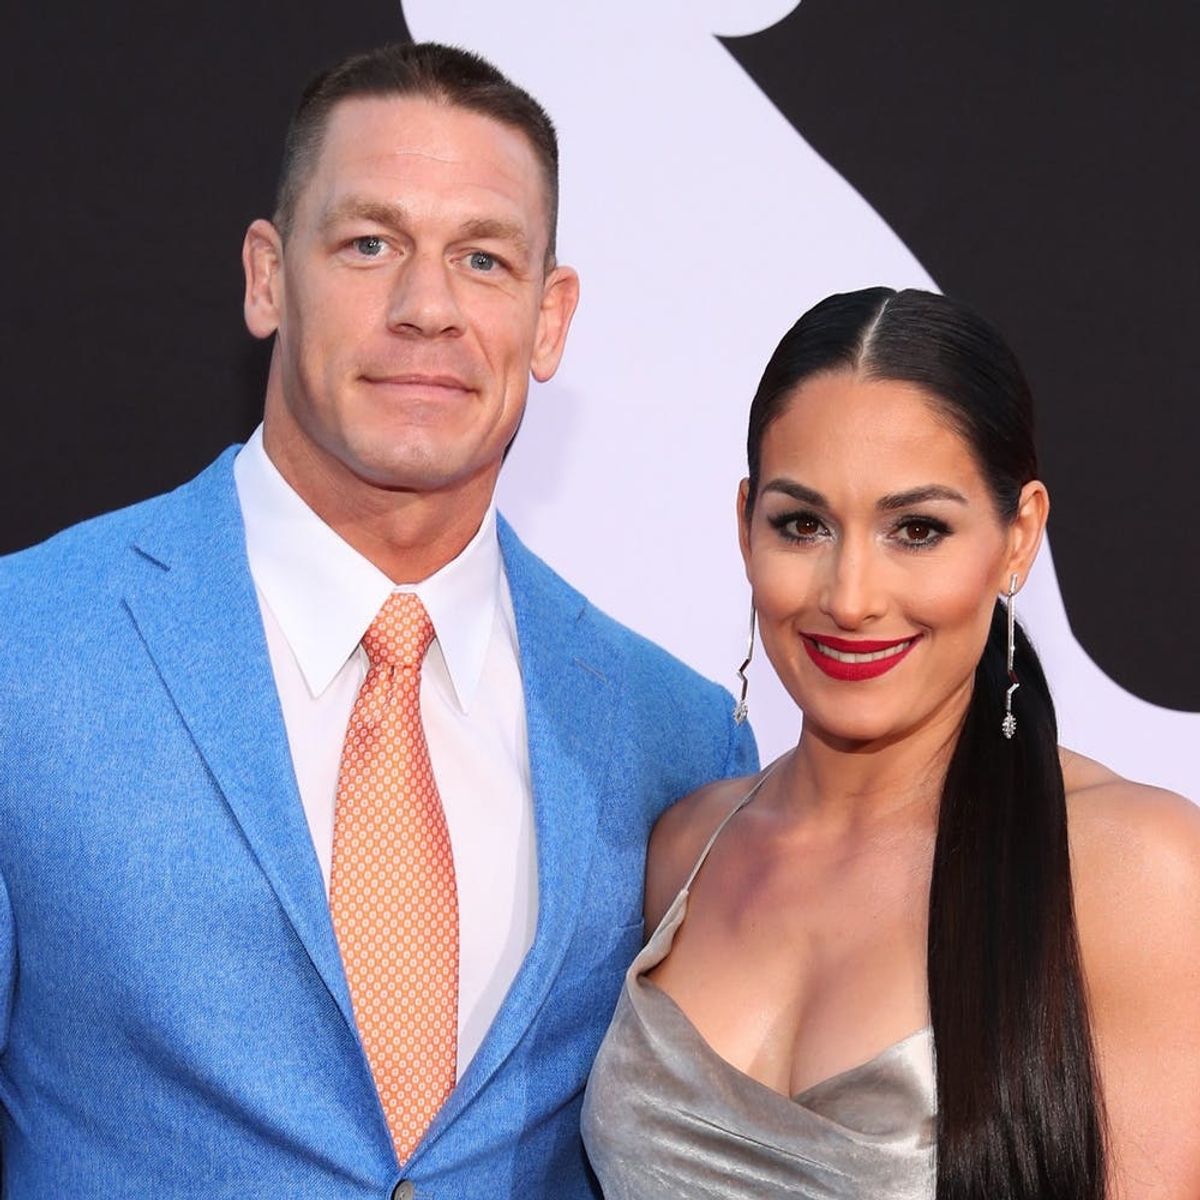 Nikki Bella Addresses the Confusion Over Her Current Relationship With John Cena